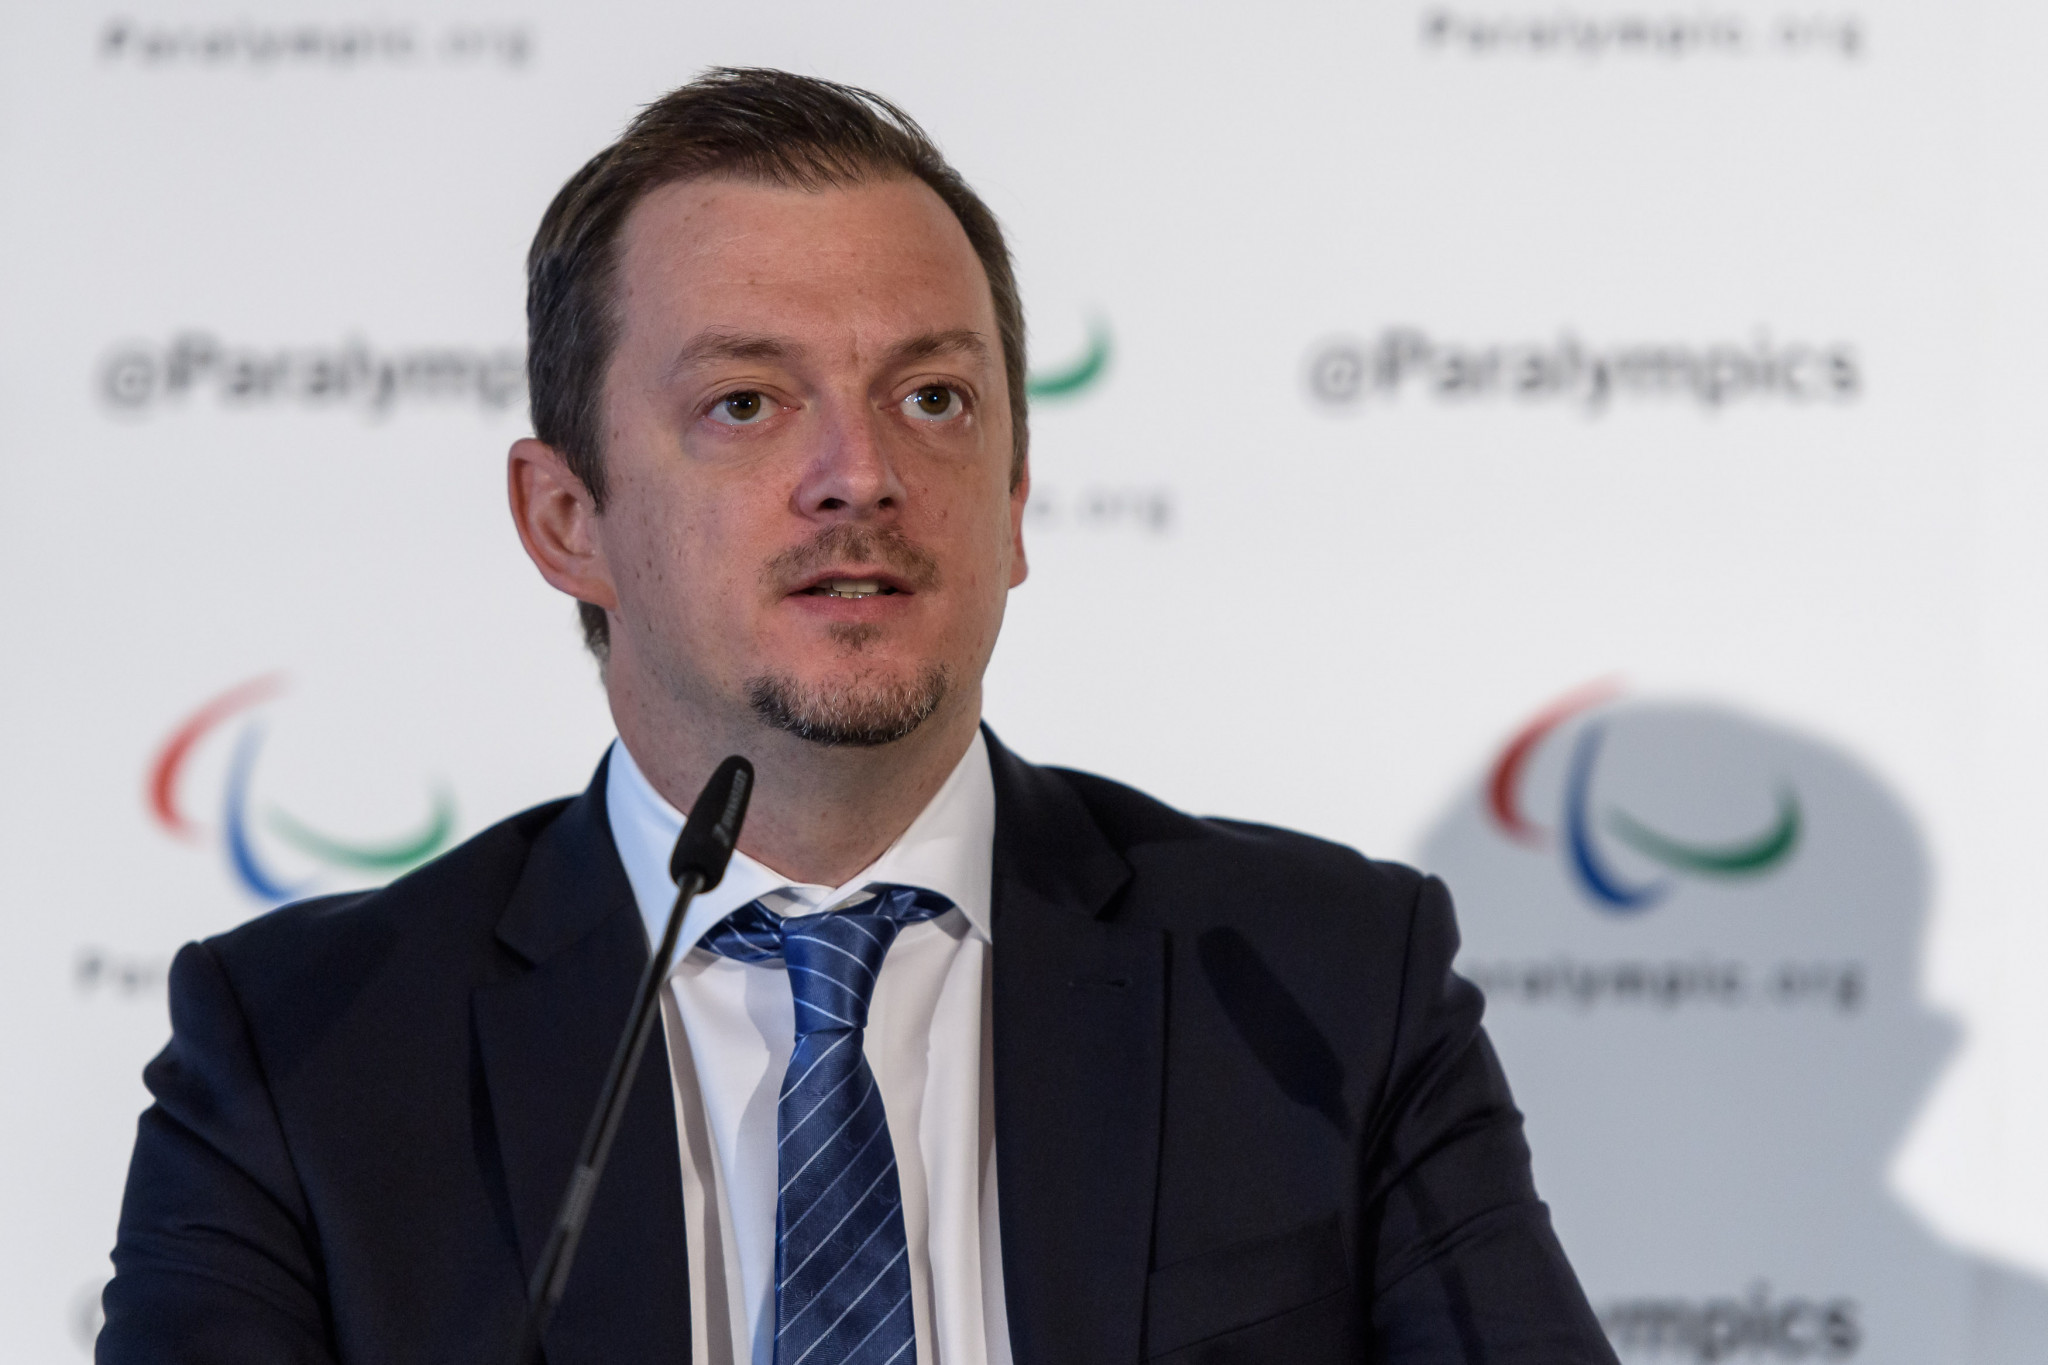 IPC President Andrew Parsons is set to speak with IPC members and athlete representatives to inform them of the key outcomes of the Governing Board meeting ©Getty Images